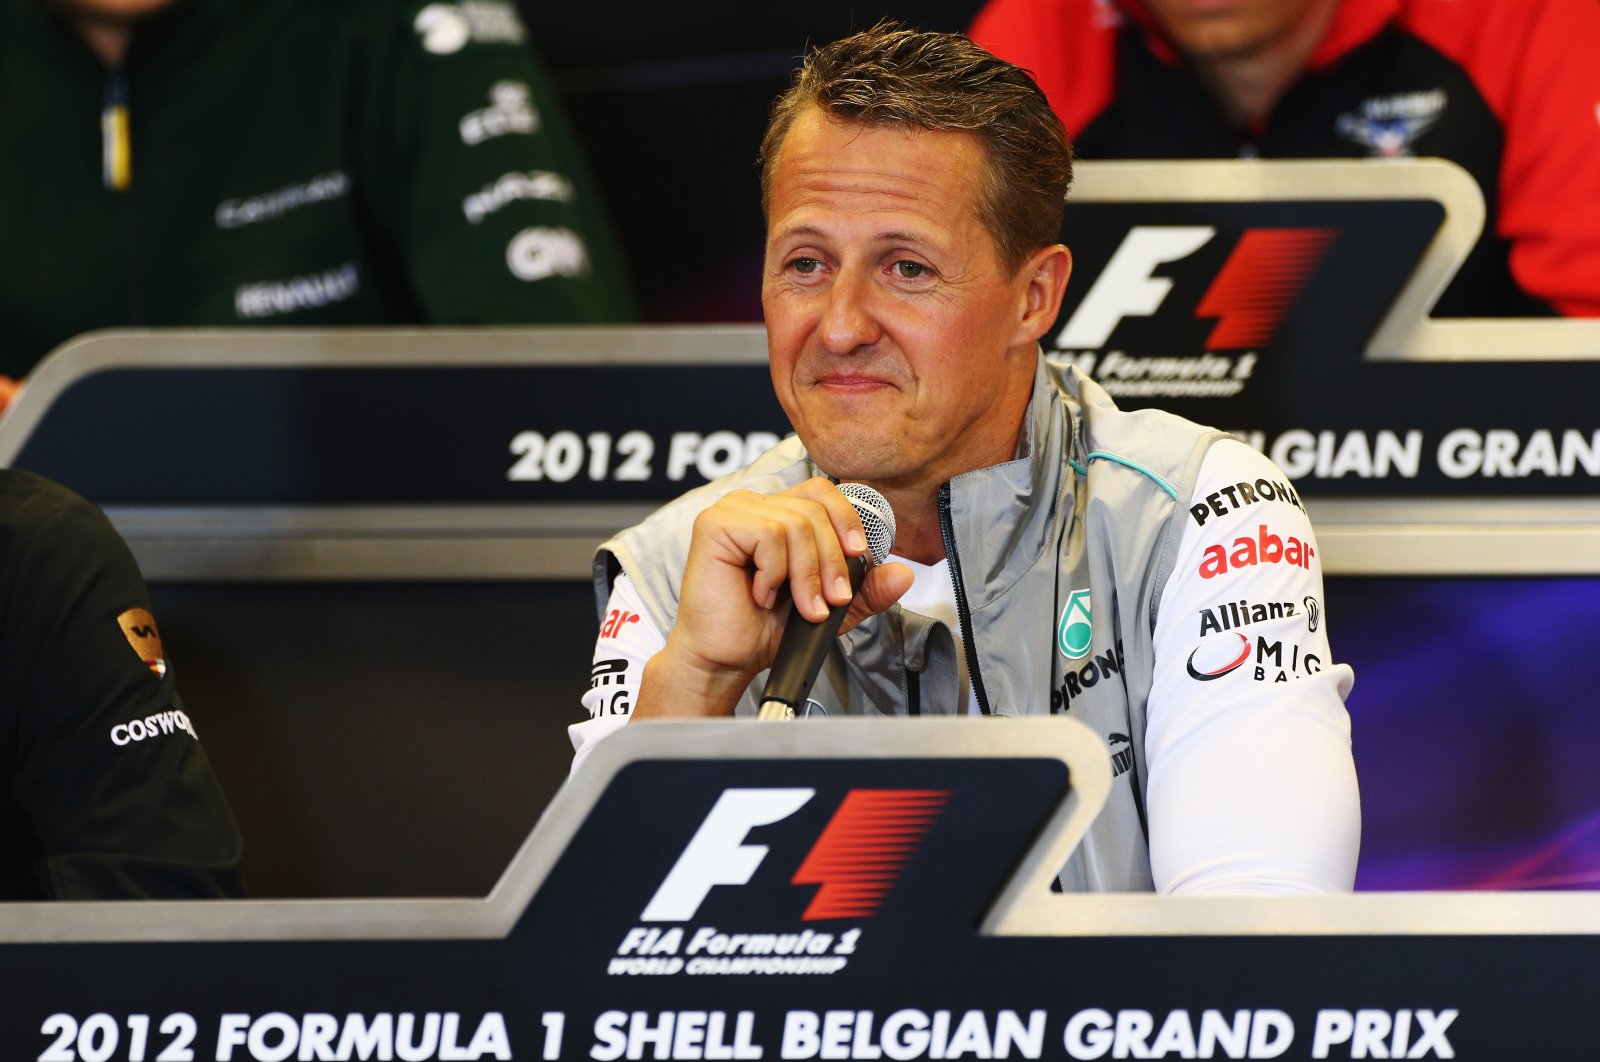 A file photo of German driver Michael Schumacher at a press conference during previews to the Belgian Grand Prix, Spa Francorchamps, Aug. 30, 2012. (Getty Images Photo)